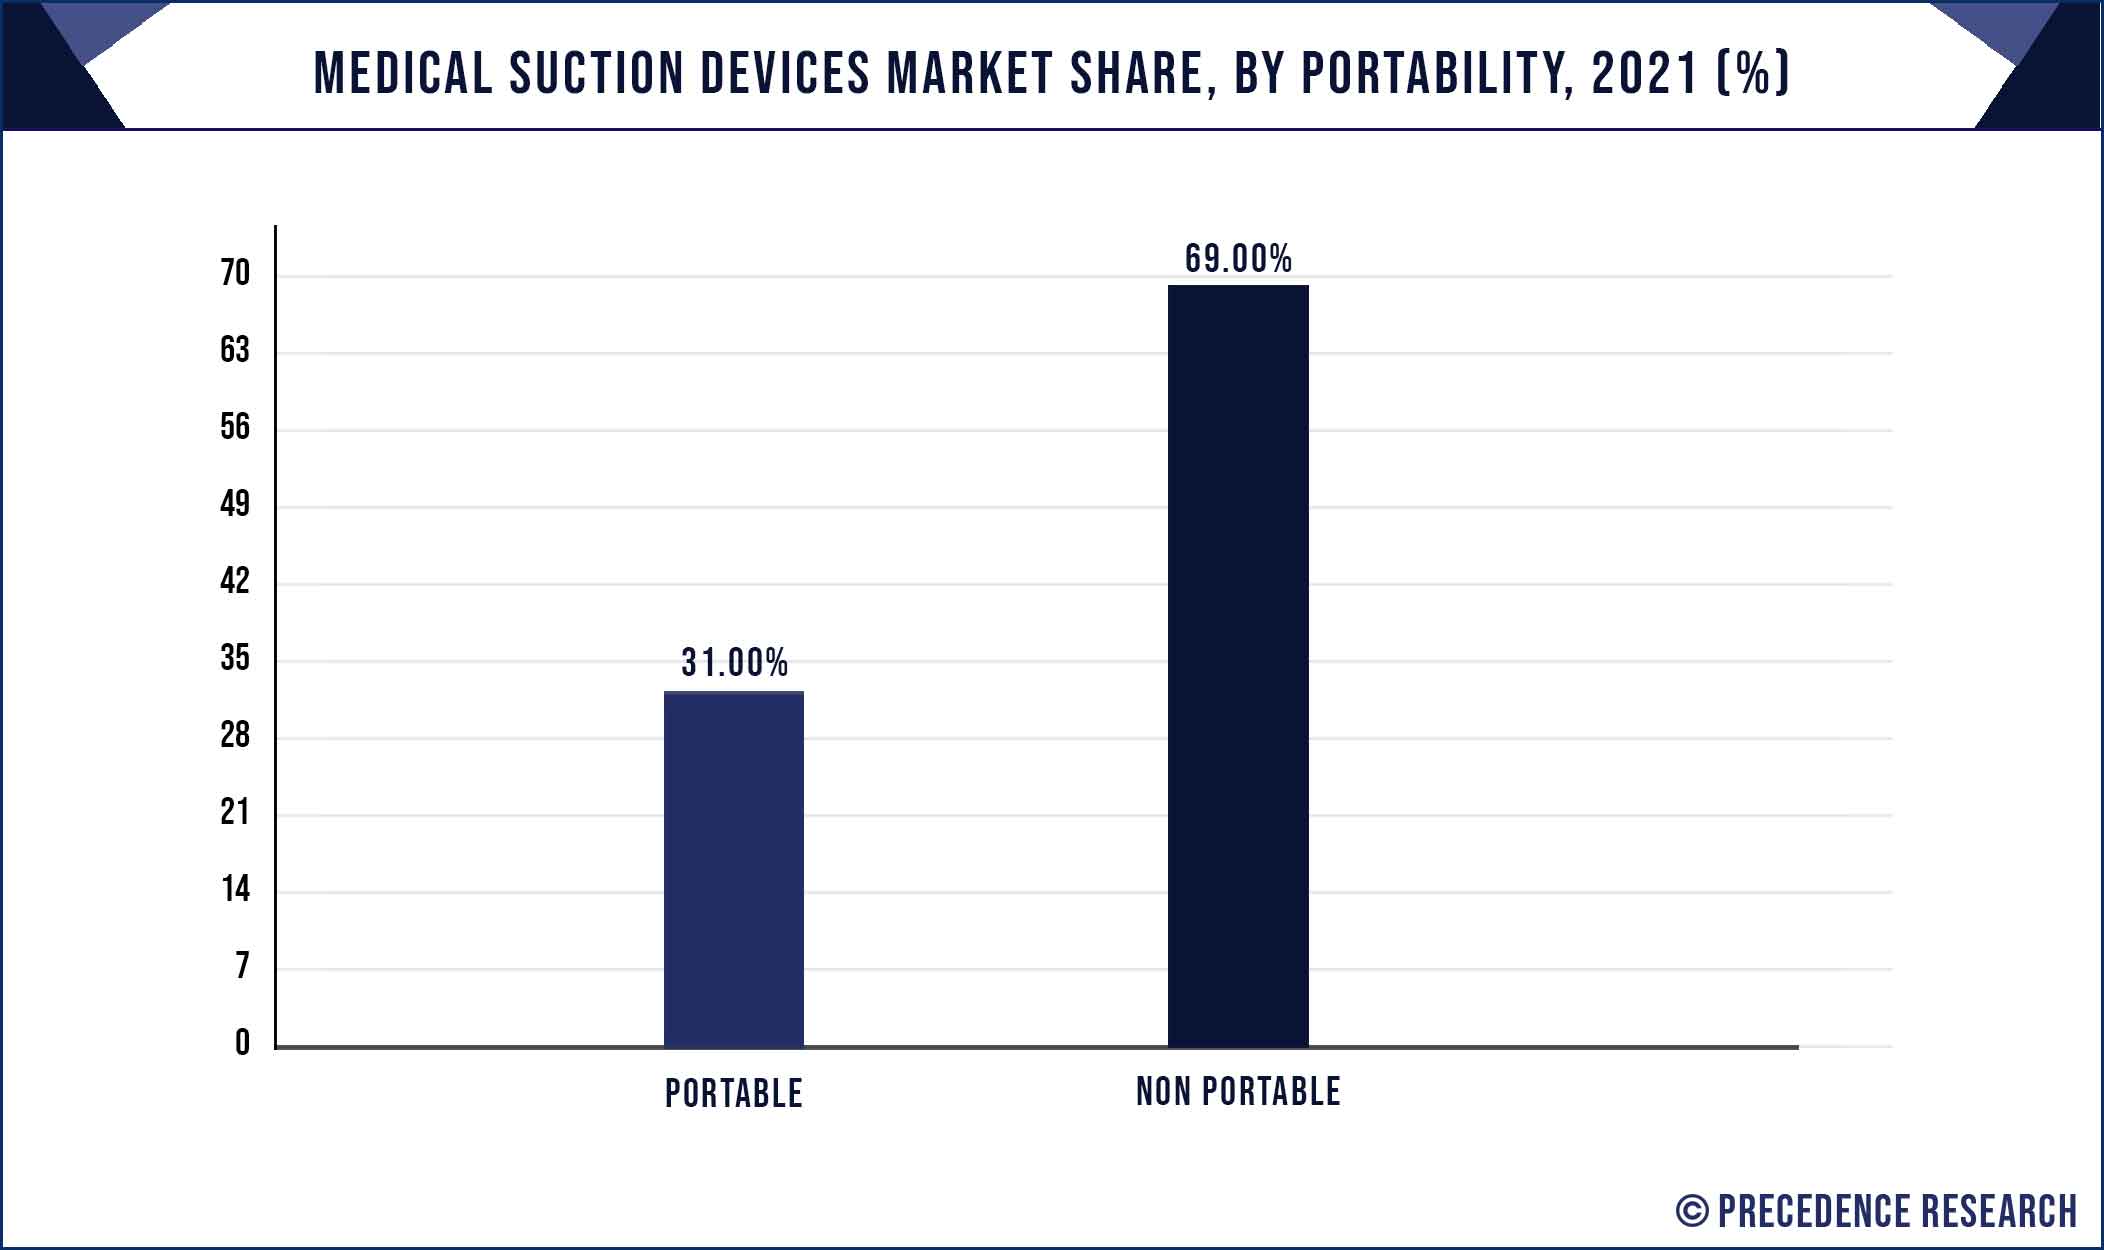 Medical Suction Devices Market Share, By Portability, 2021 (%)